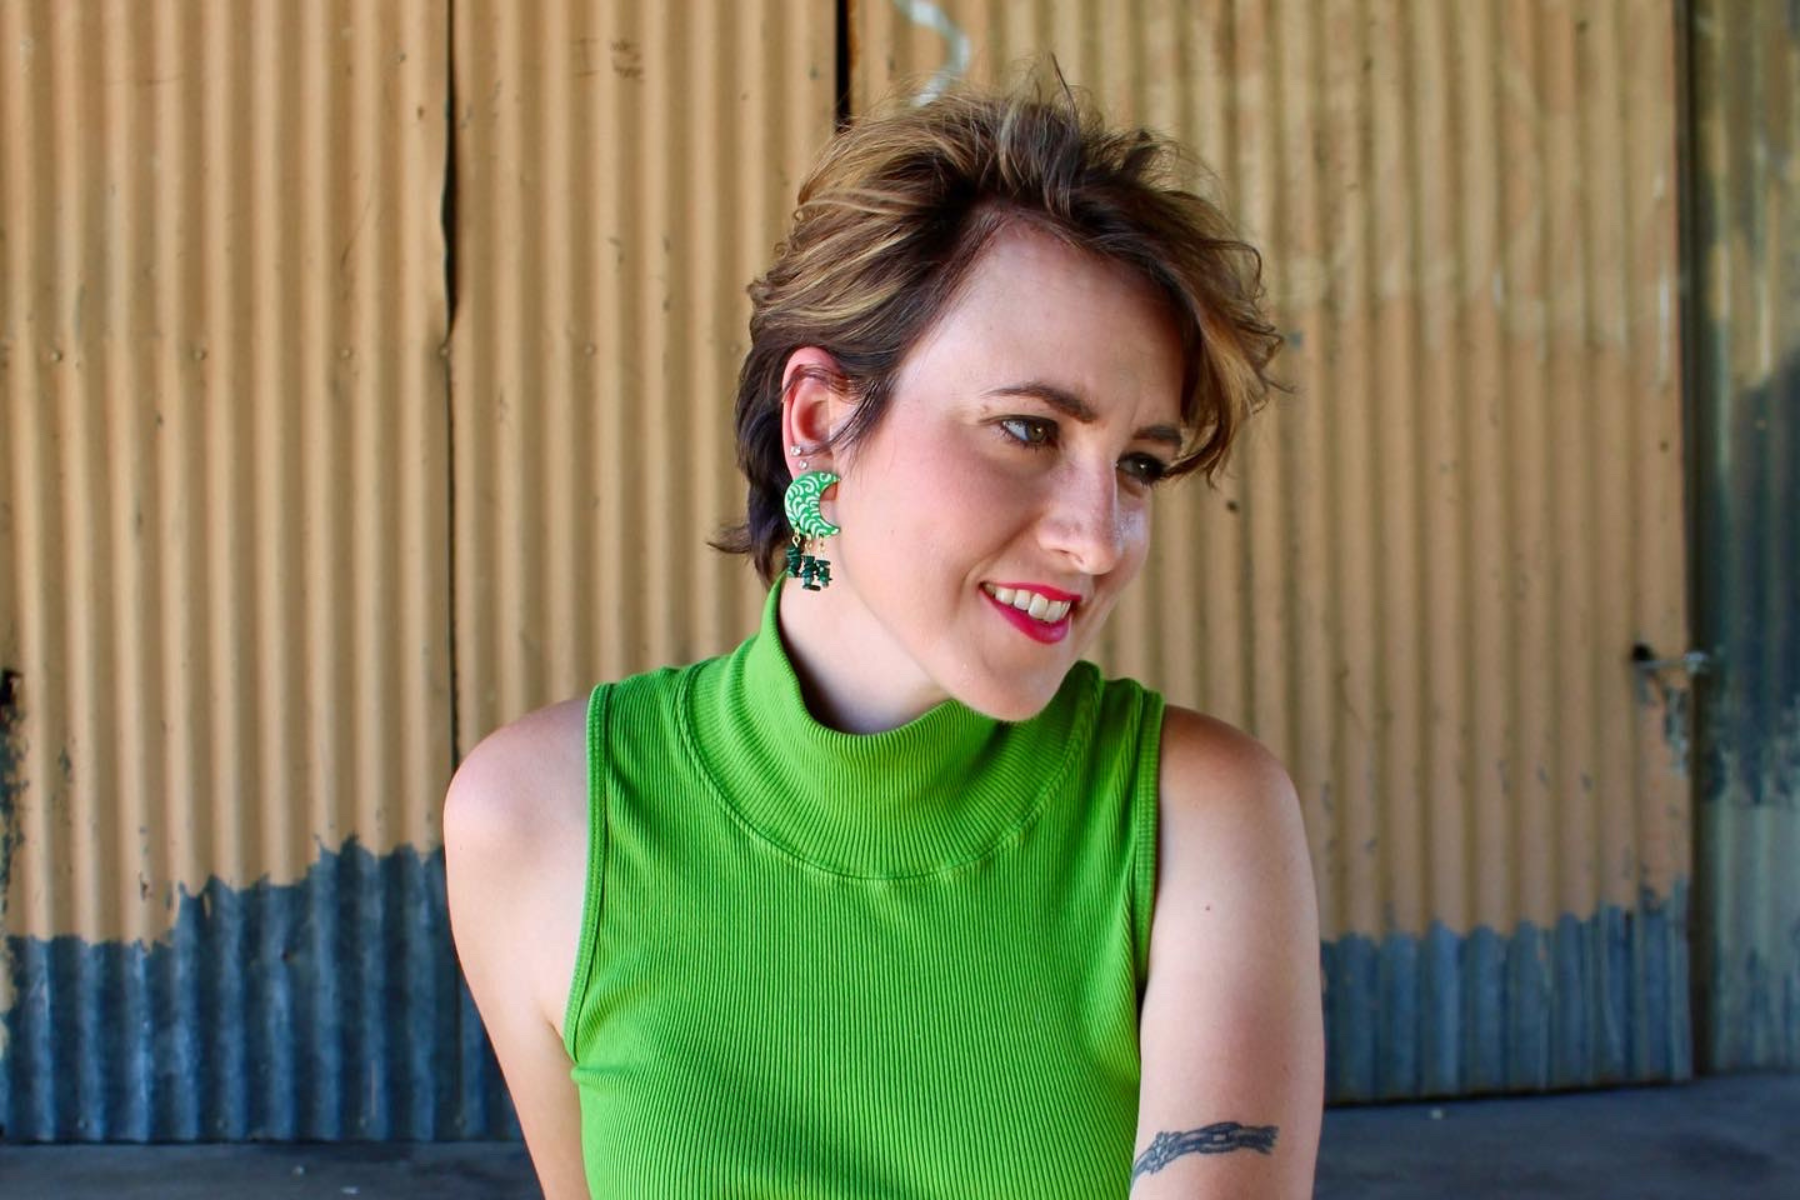 This Local Etsy Creator Uses Earrings to Spread Mental Health Awareness - D Magazine